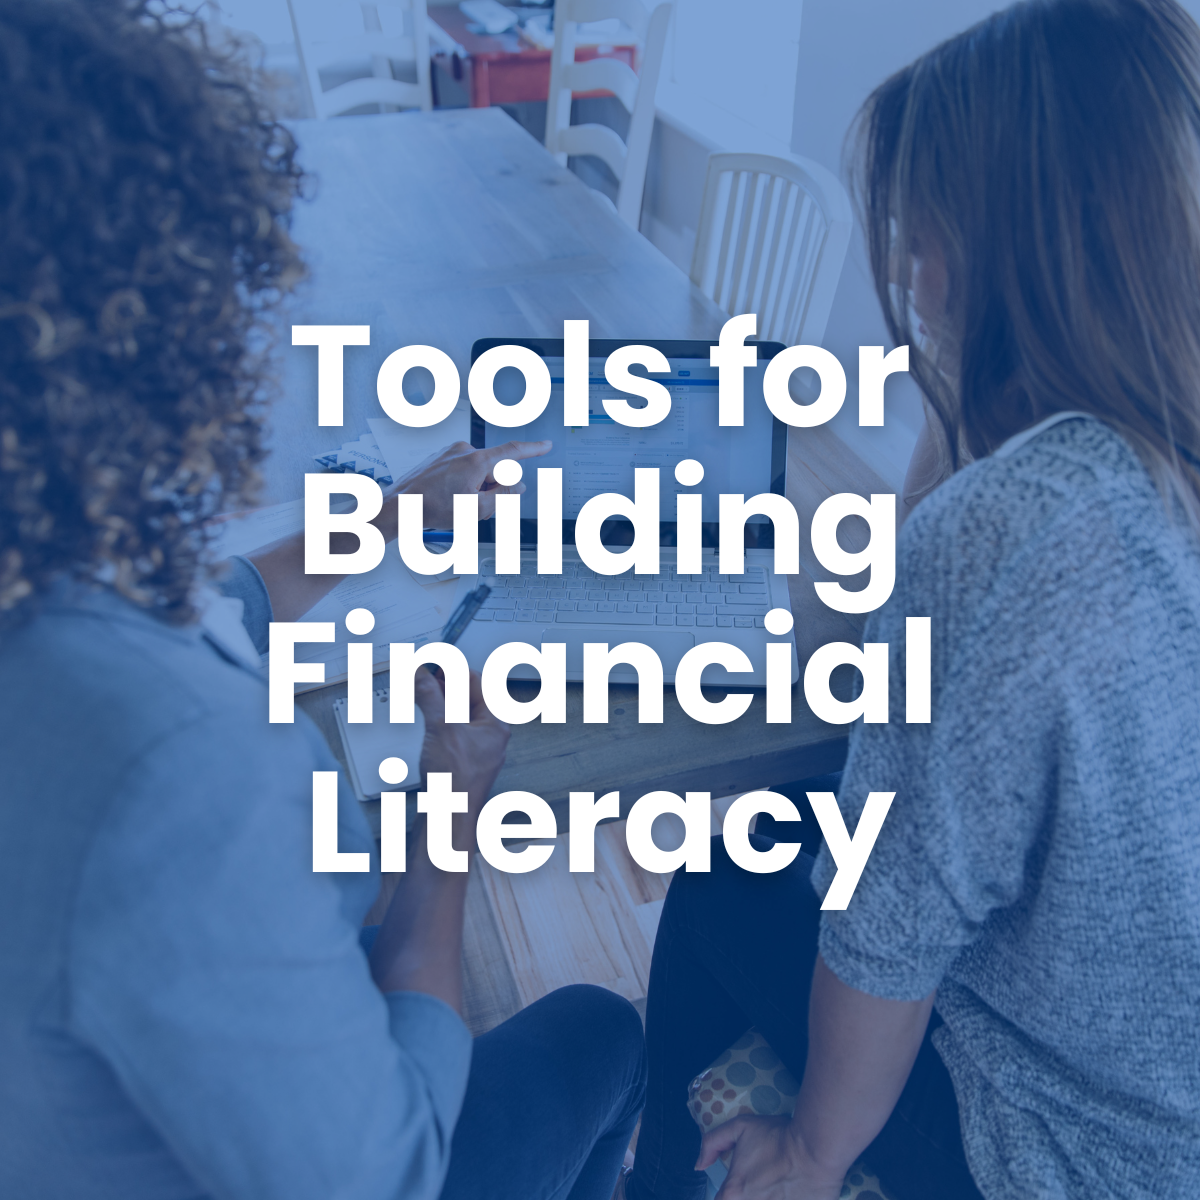 5 Handy Tools and Resources for Building Financial Literacy